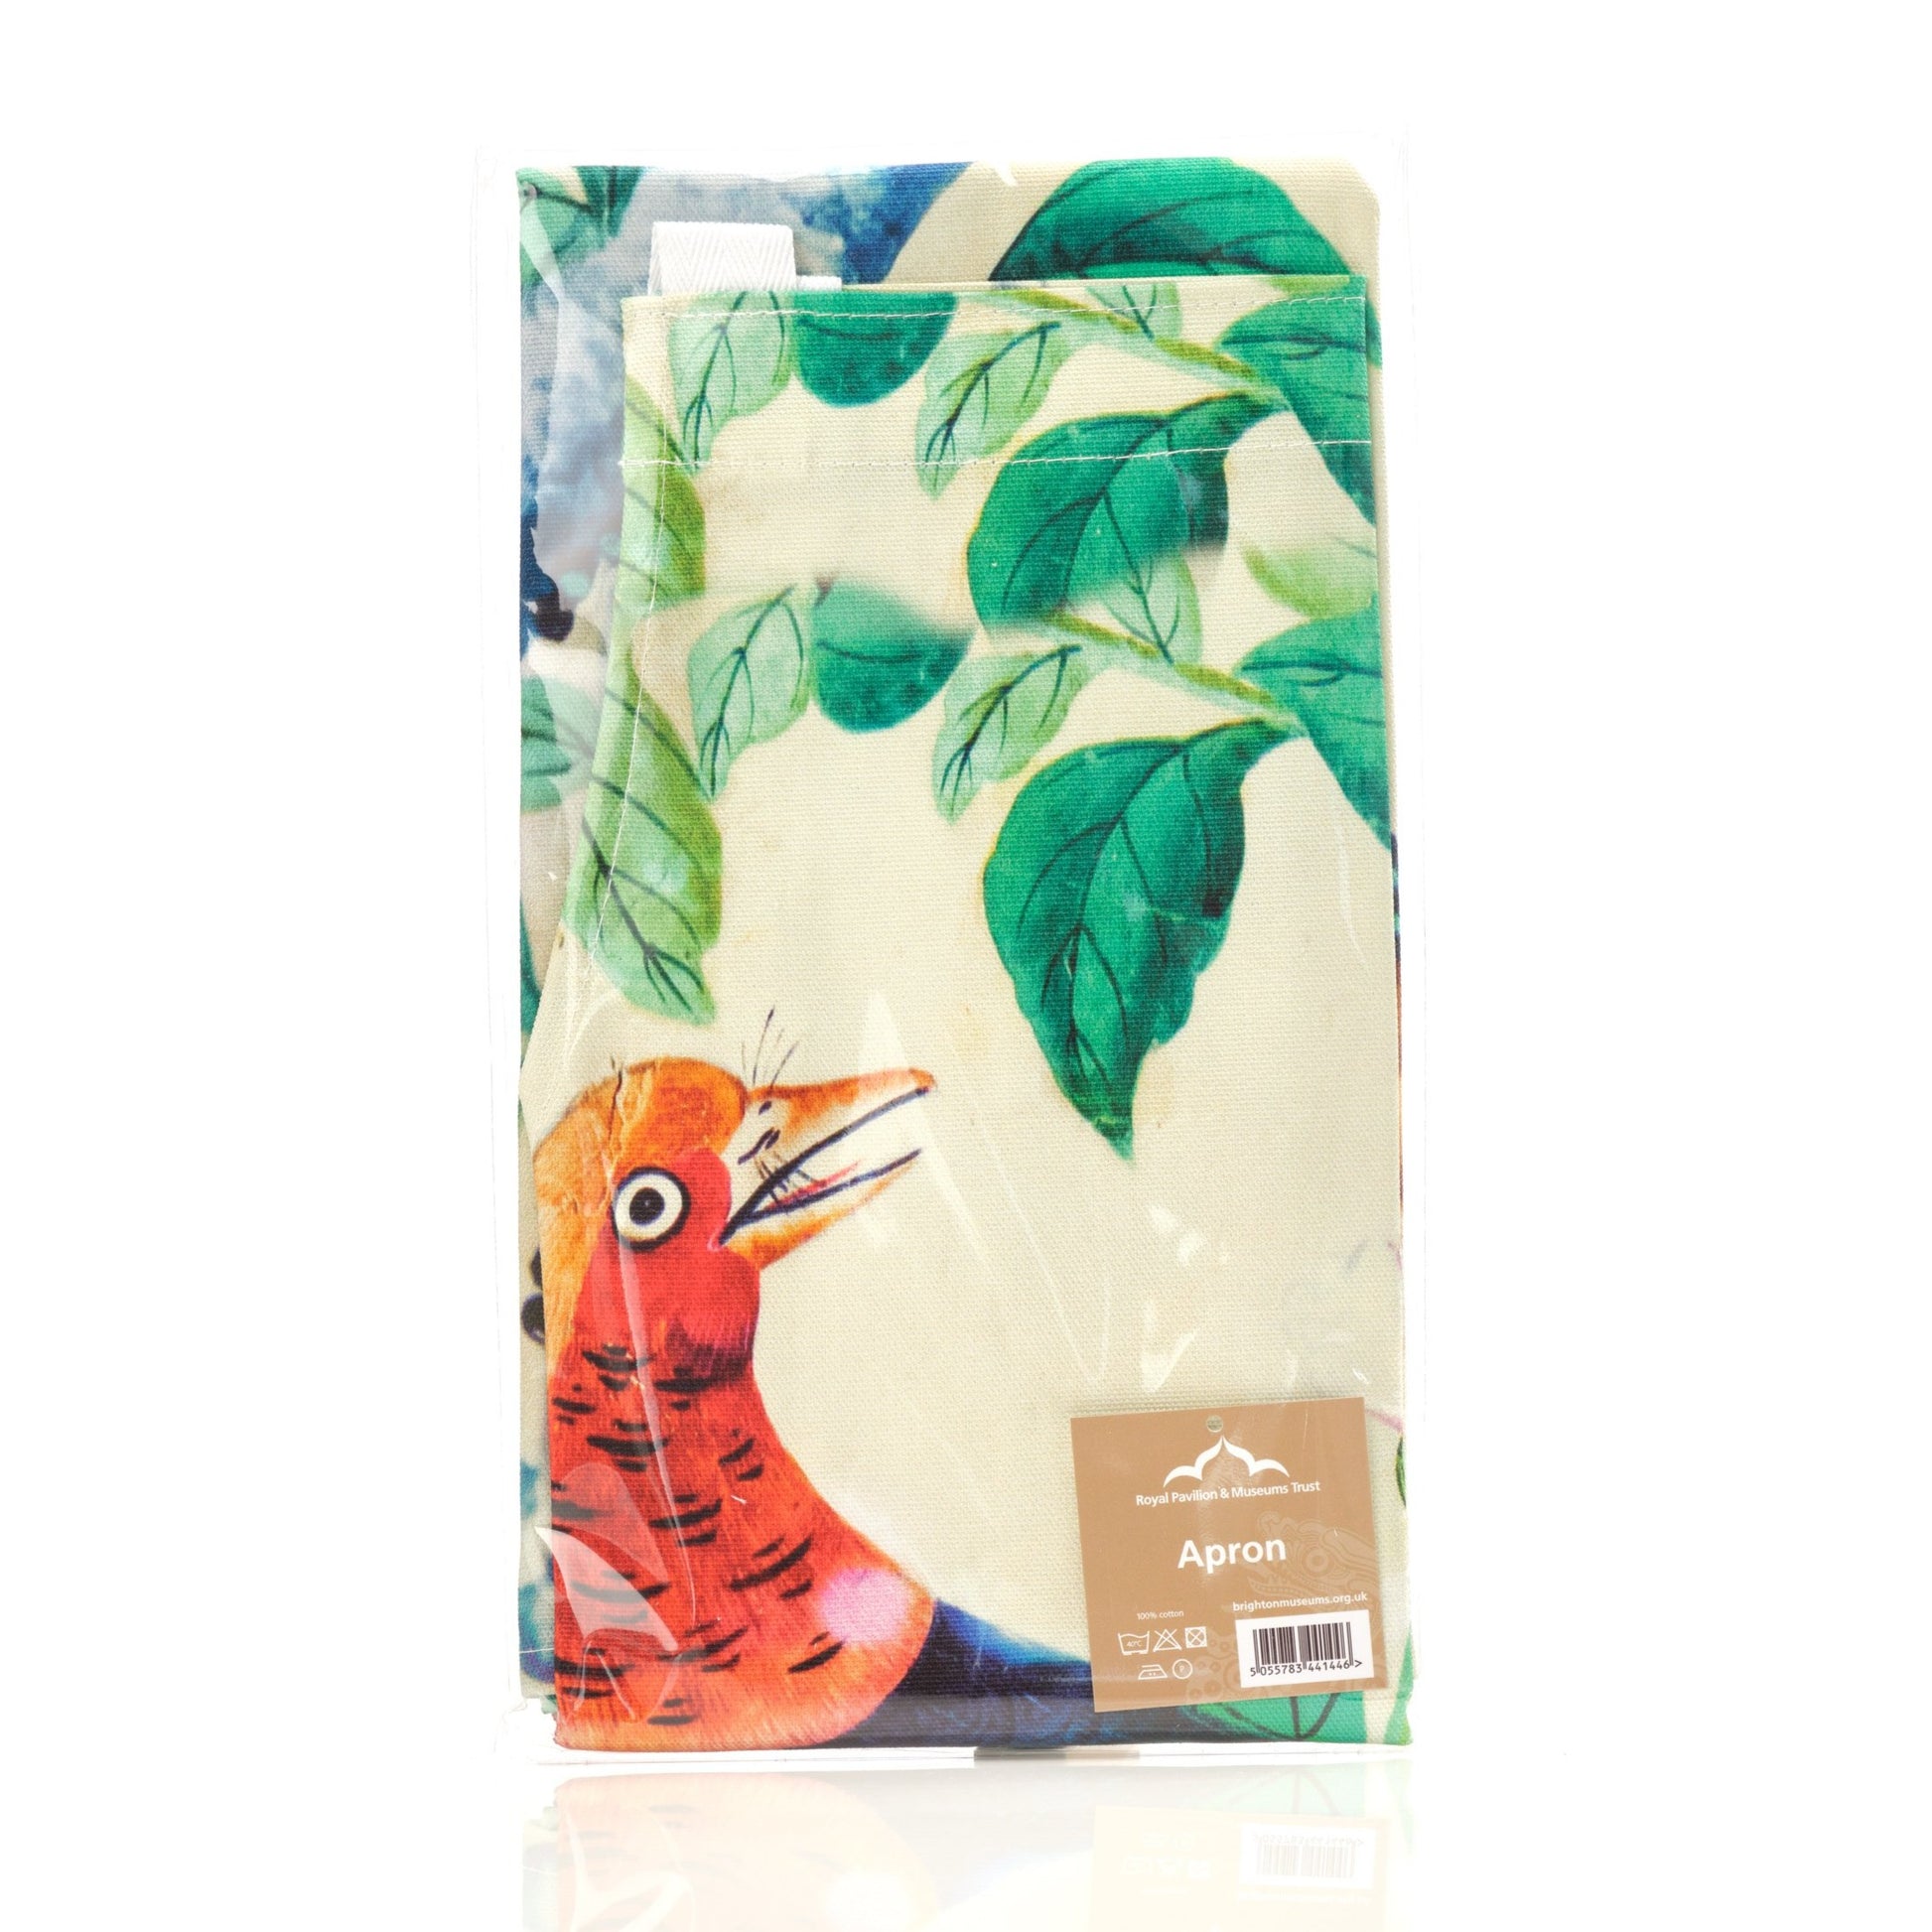 Folded apron with red bird's head and green leaves on pastel yellow fabric. Paper label with barcode in bottom right hand corner.